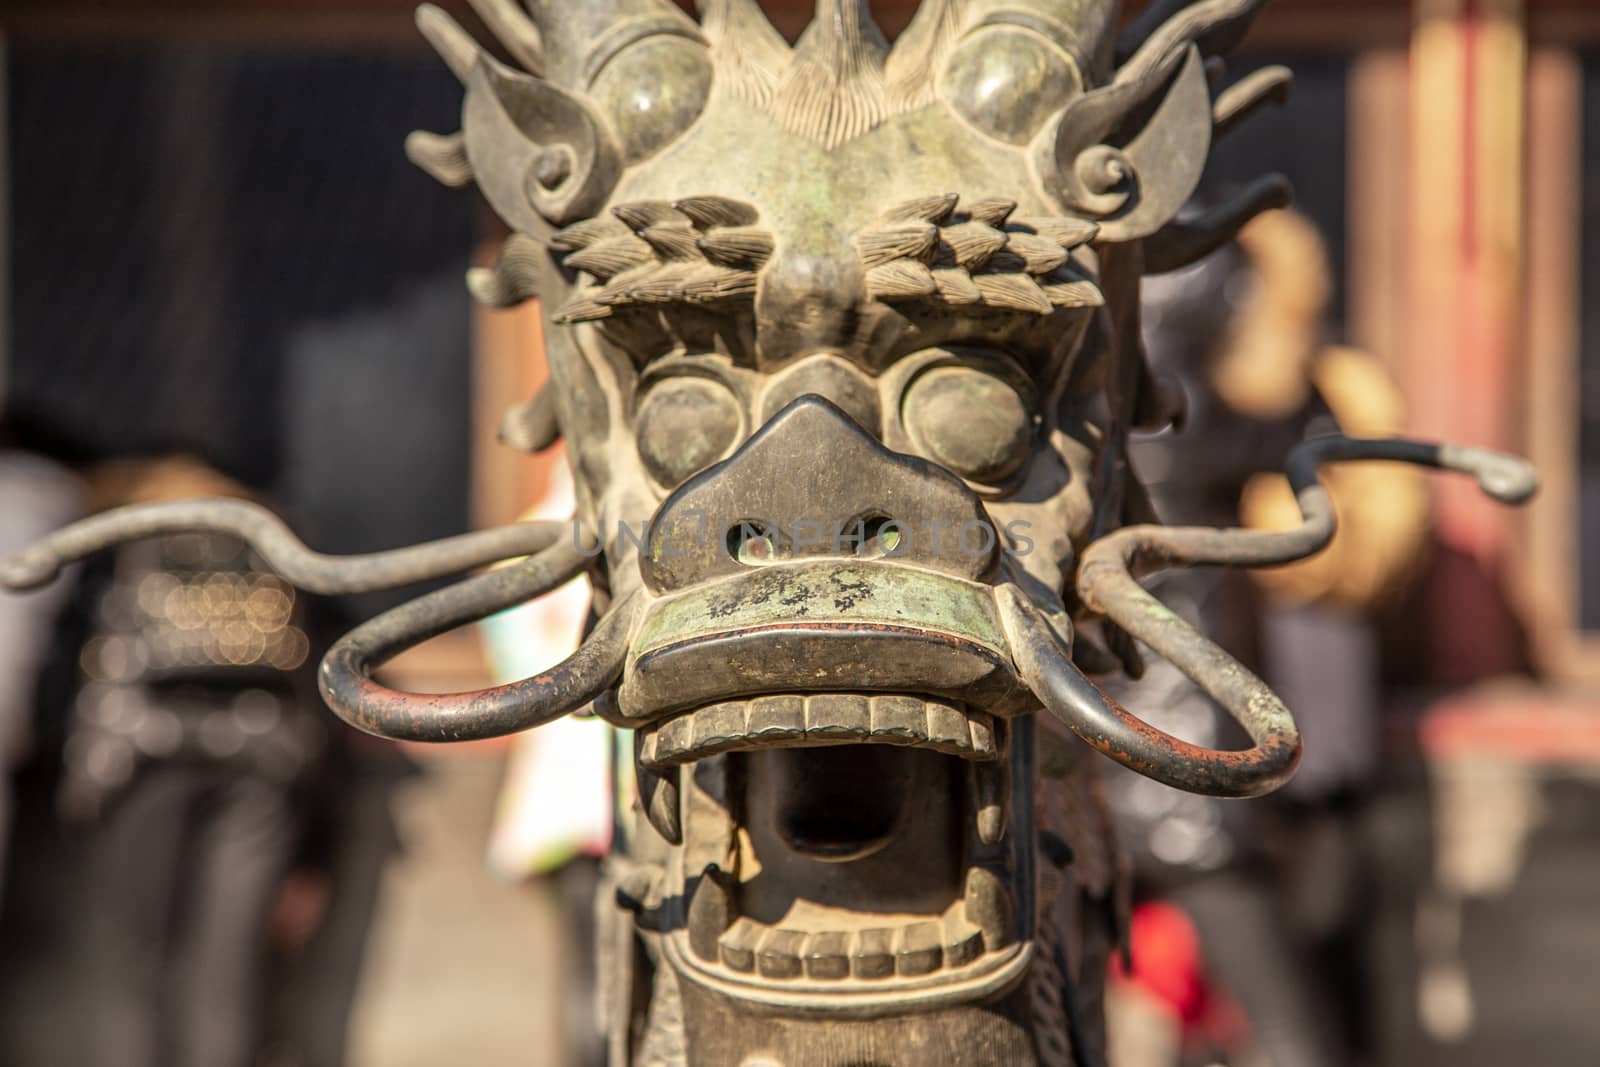 Chinese Dragon statue head with open jaws from Ming dynasty era, by ambeon